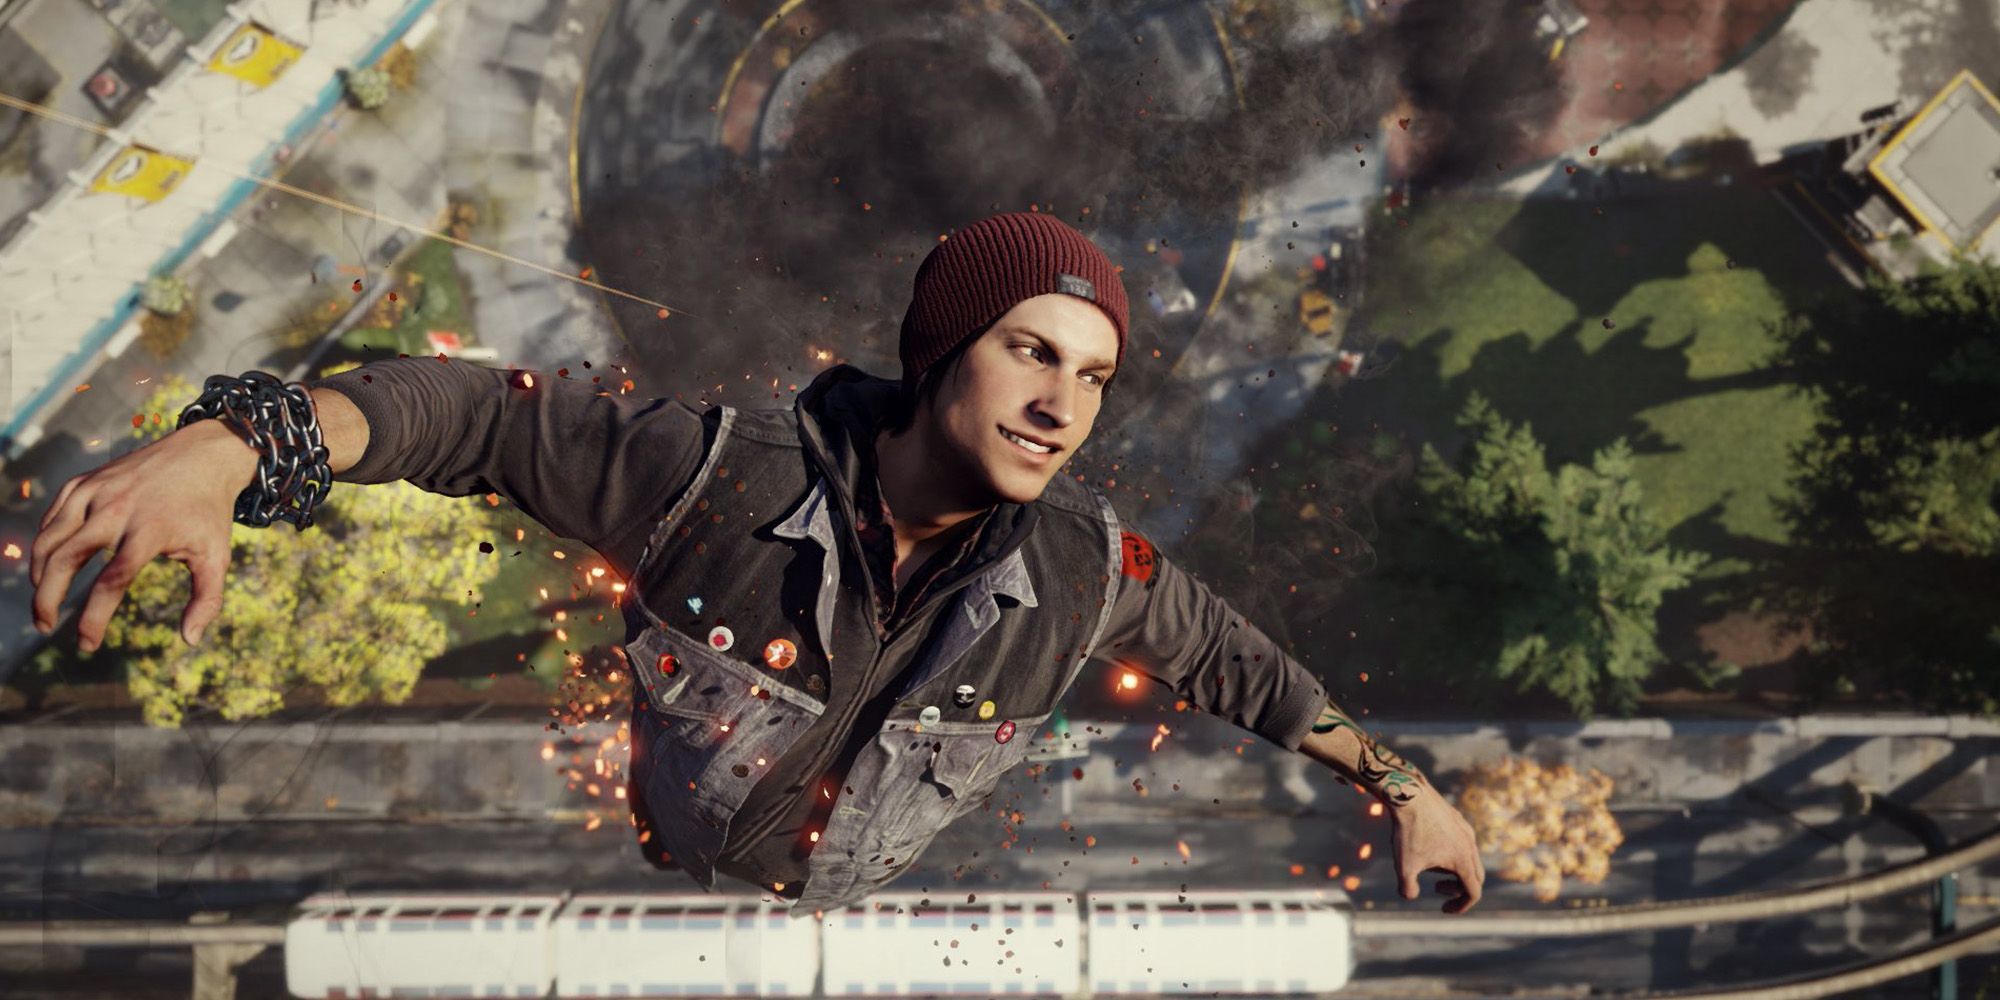 Infamous Second Son: Delsin Rowe gliding through the air